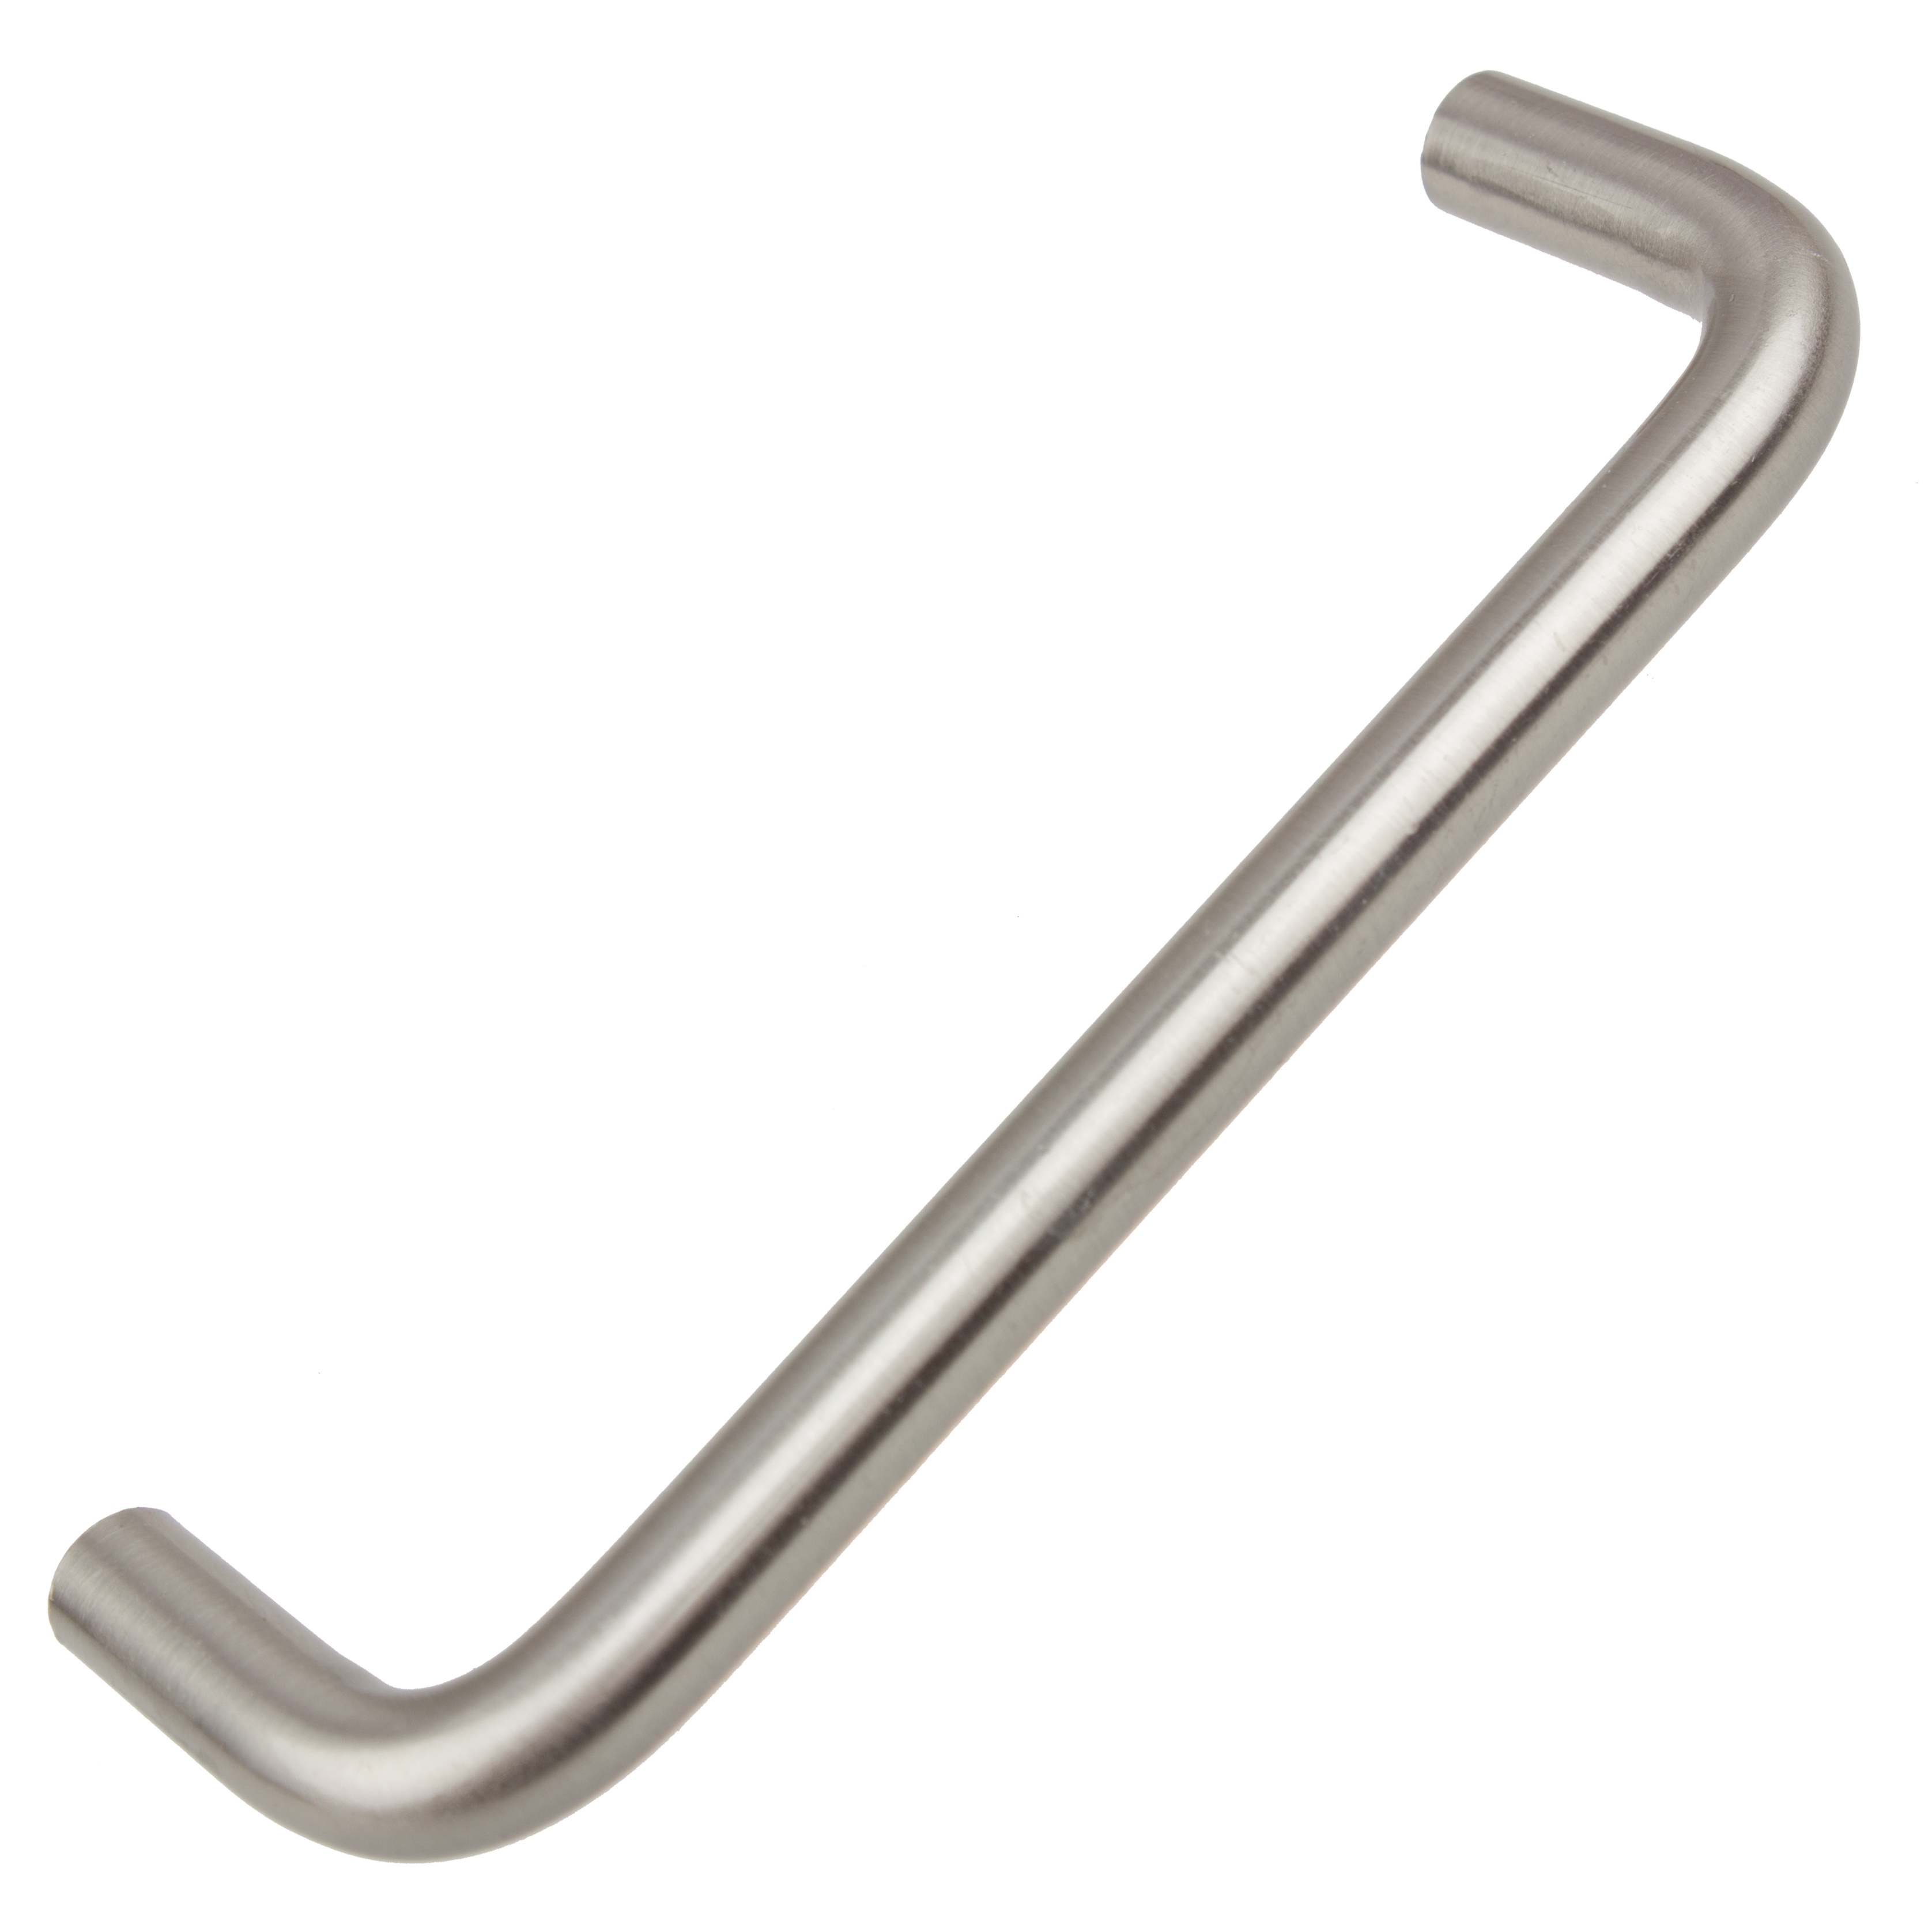 GlideRite 3-3/4 in. Center Solid Steel Wire Cabinet Pull, Stainless Steel finish, Pack of 10 - image 3 of 4